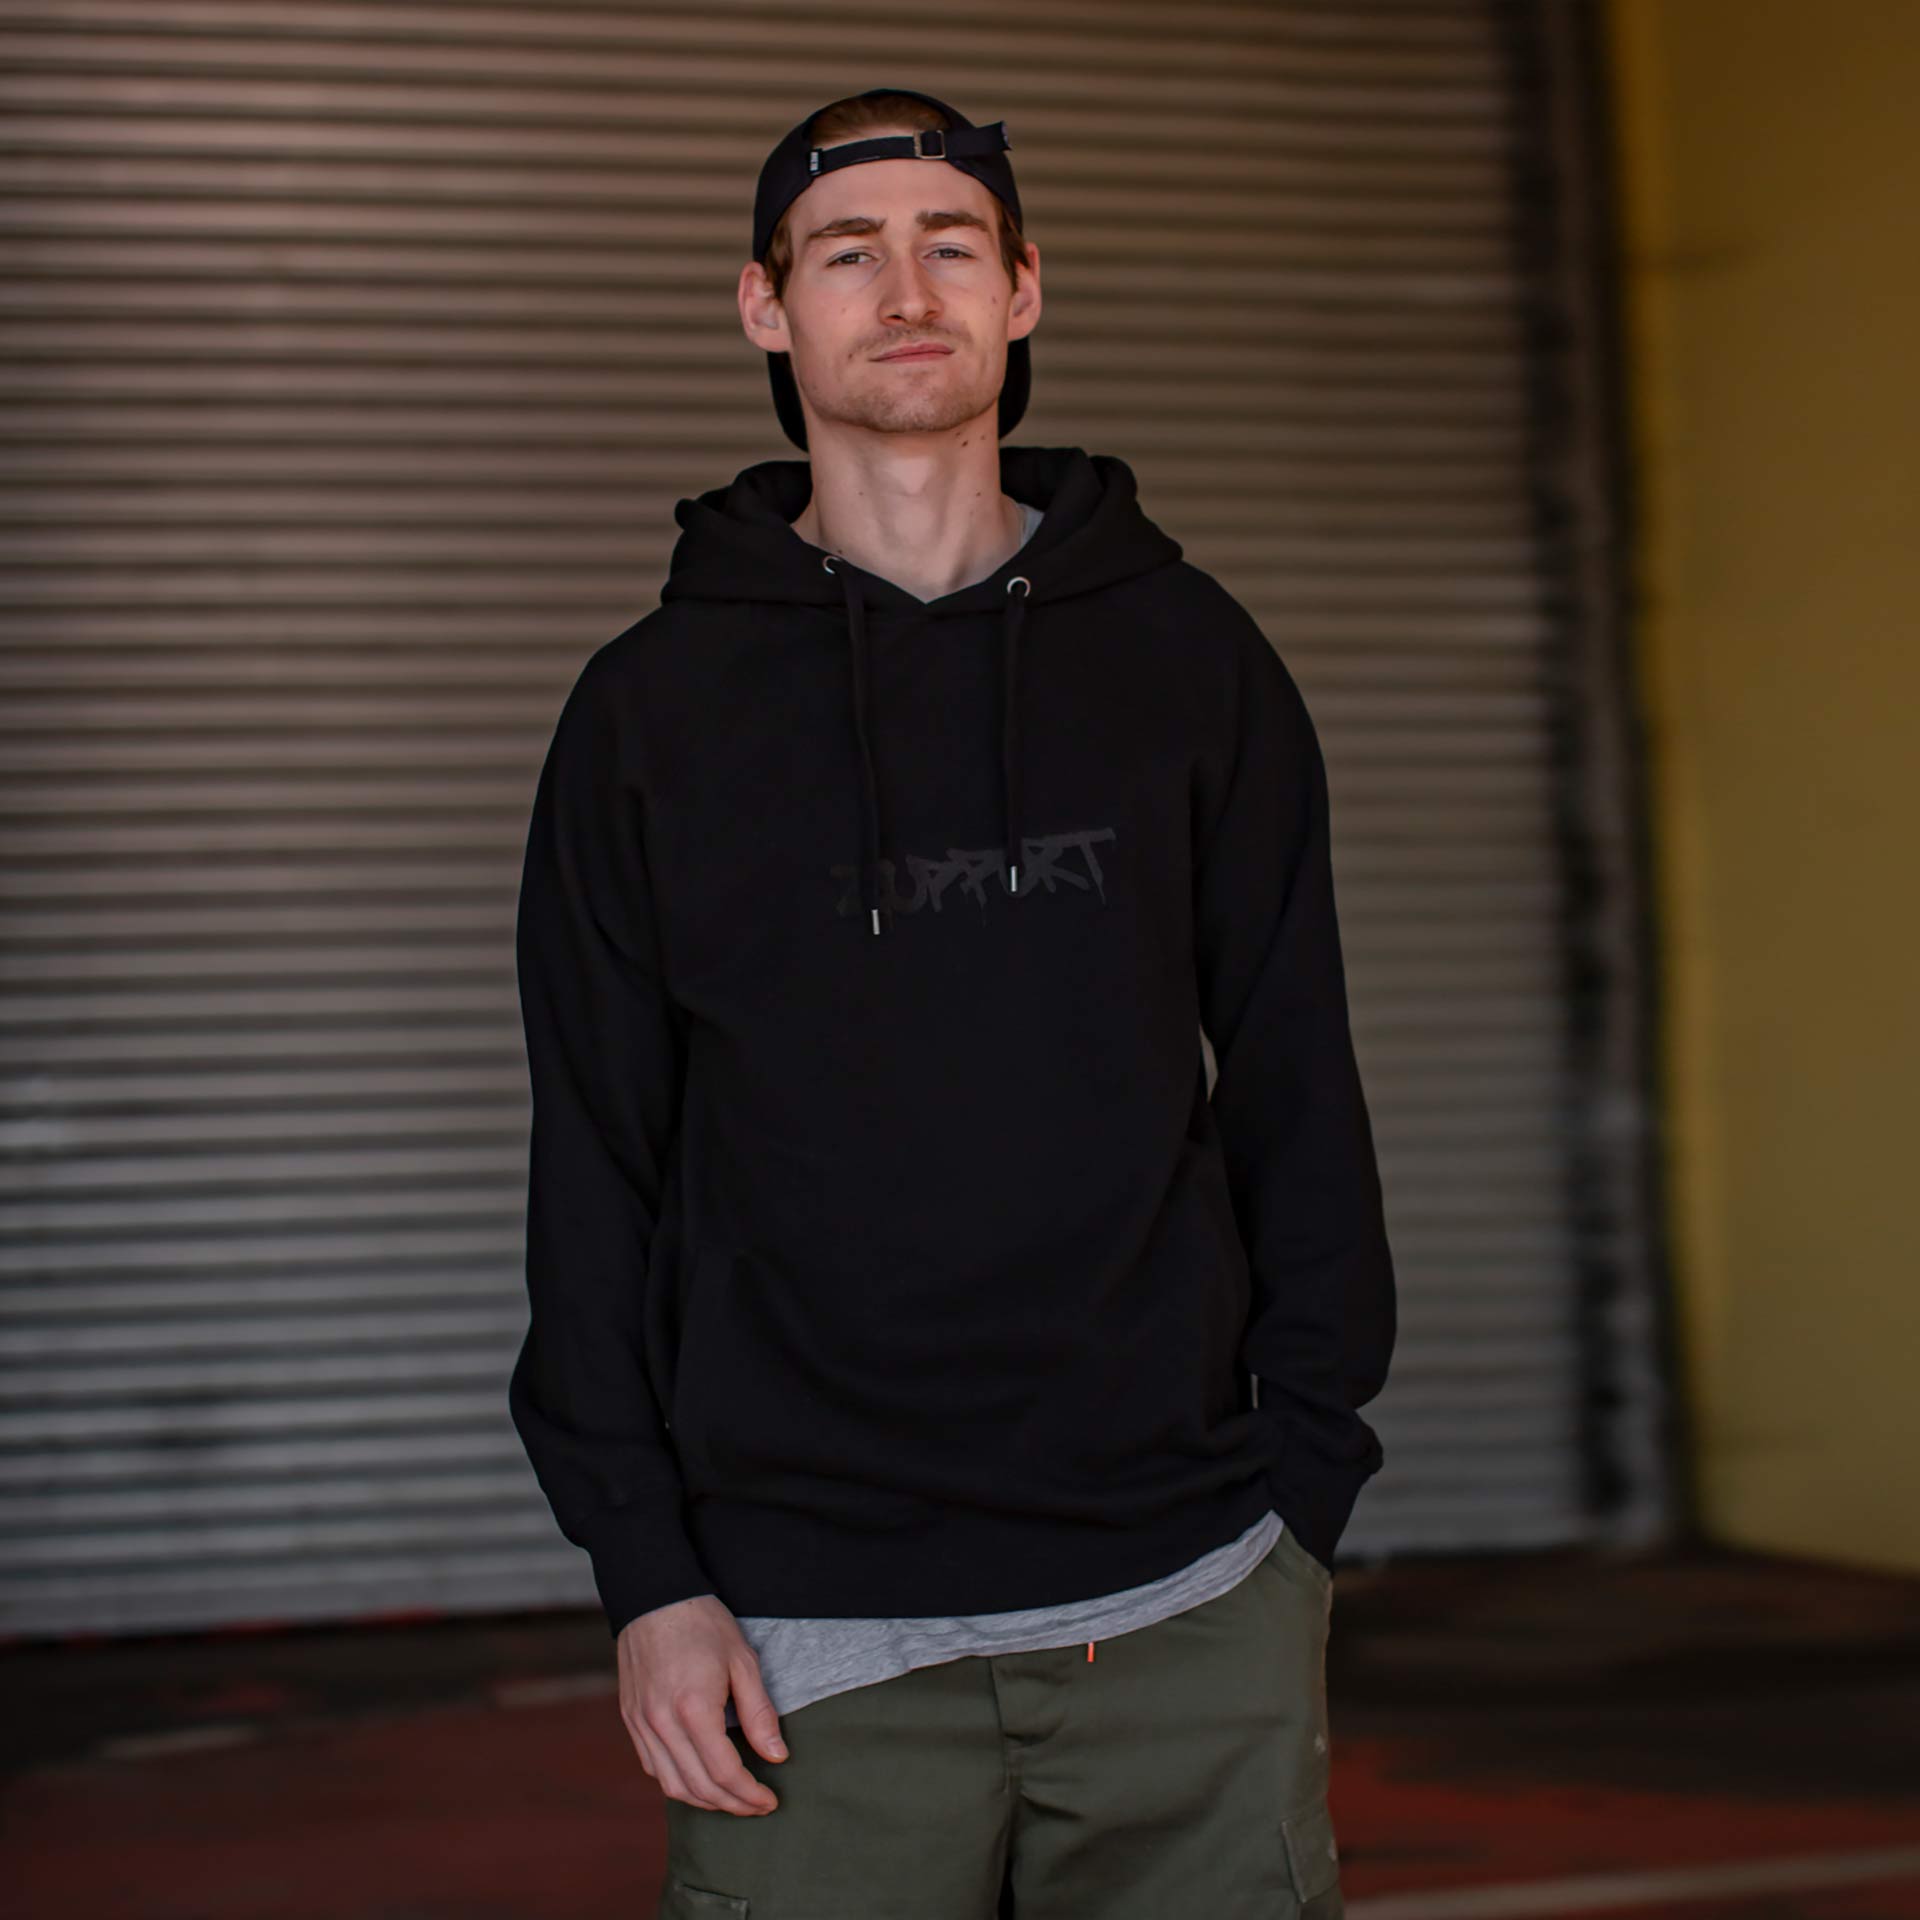 ZUPPORT stitched Tag Logo Hoody black